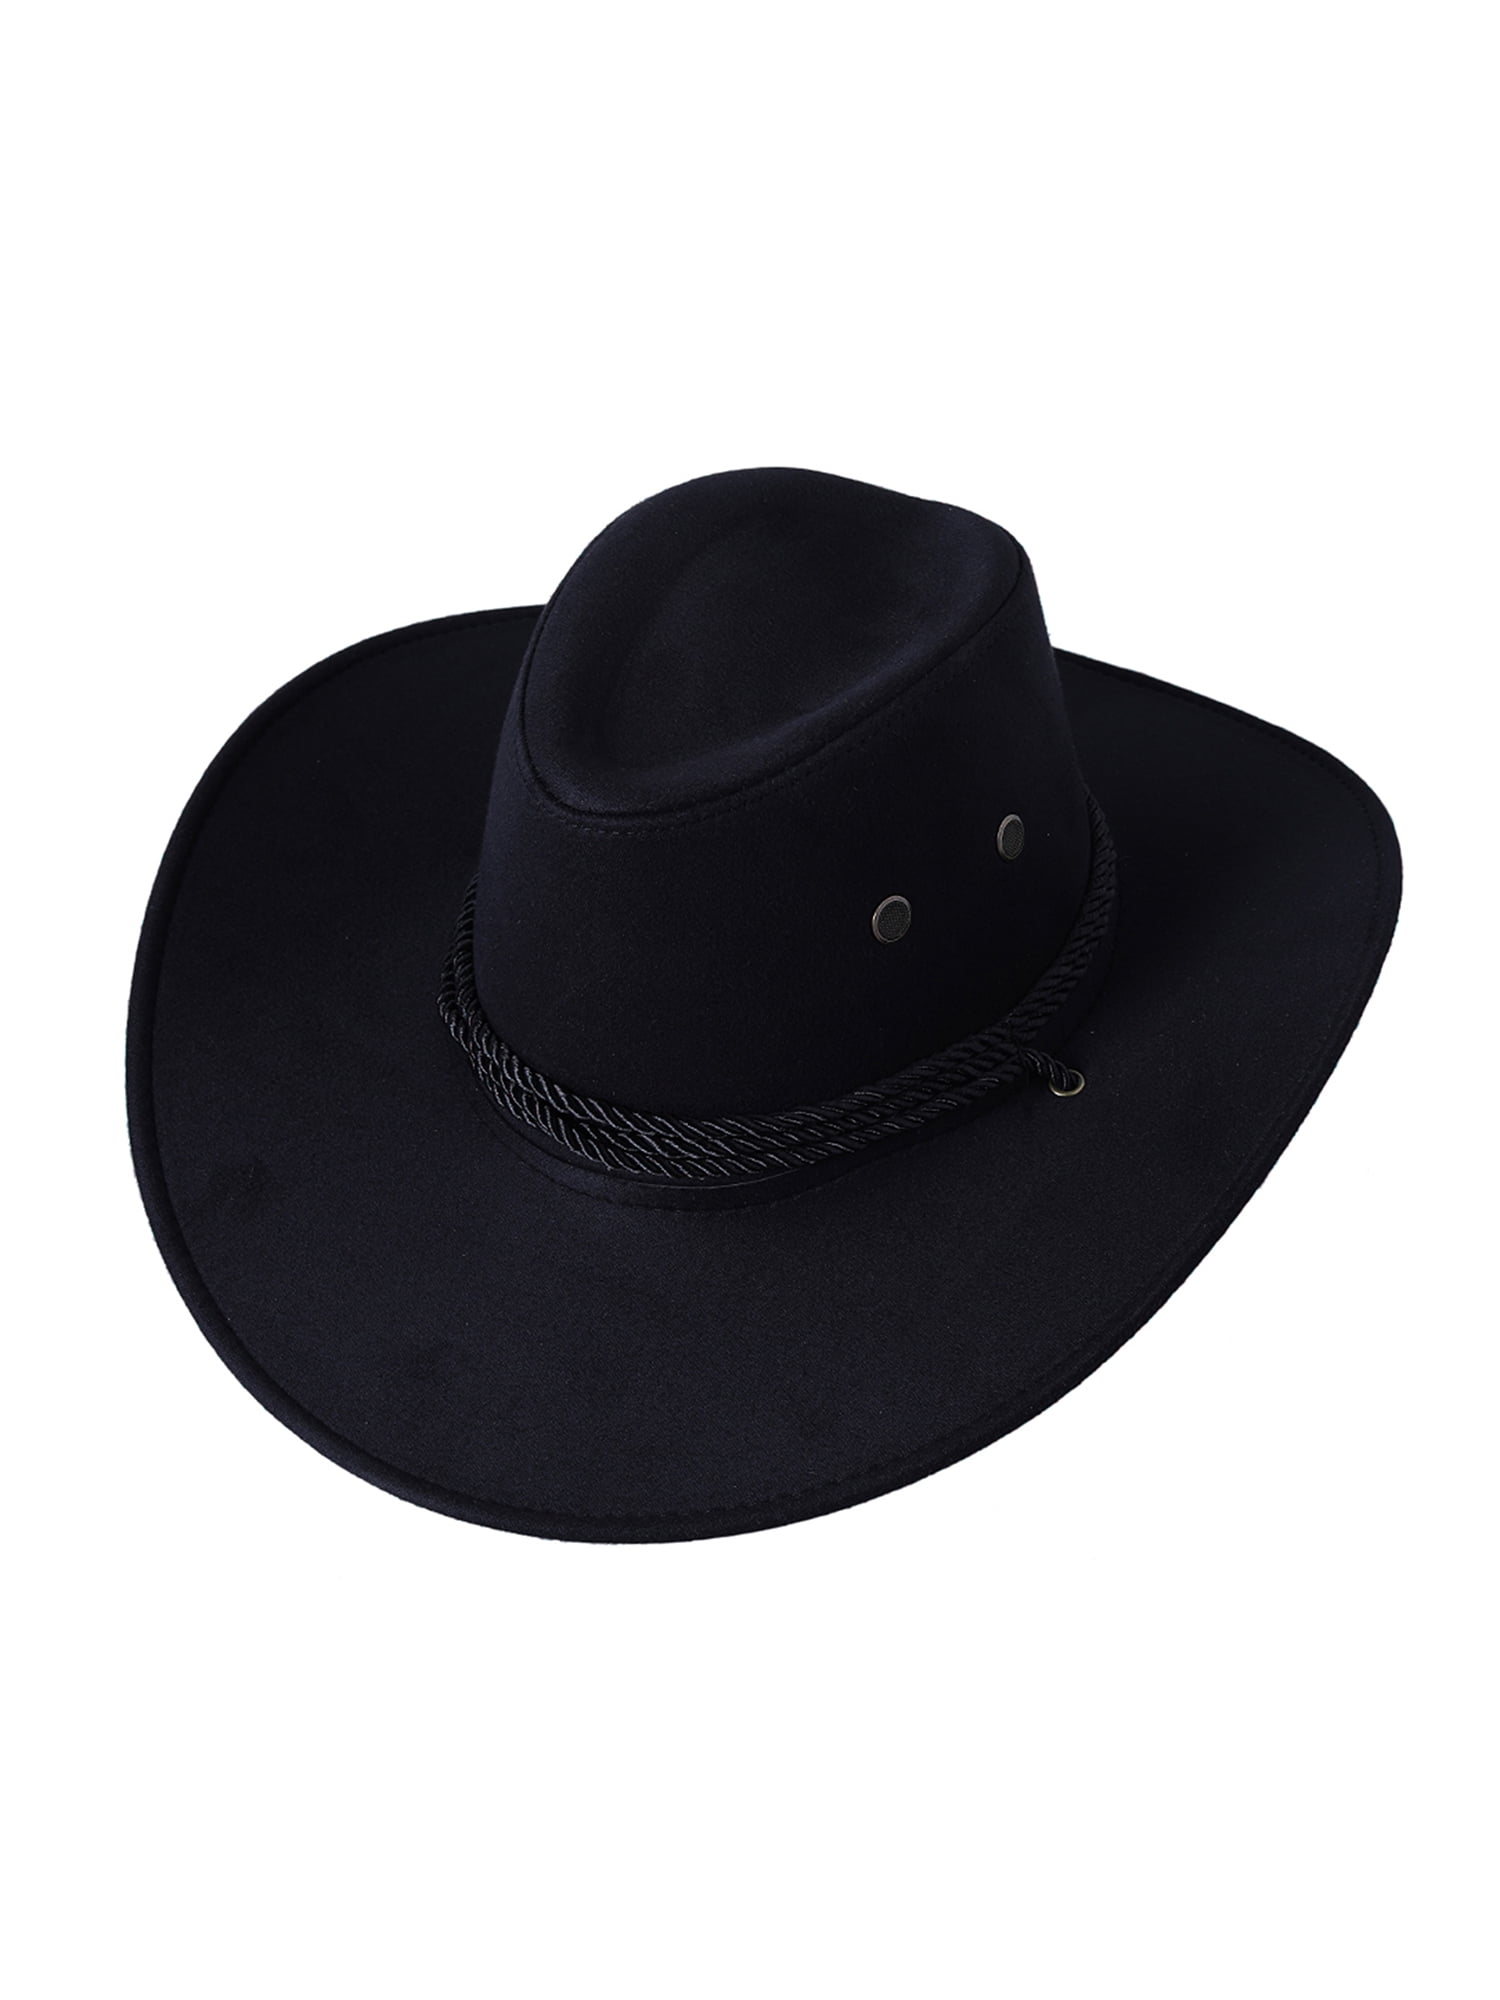 Men Cowboy Hat with Adjustable Chin Rope Wide Brim Vintage Style Clothing  Accessories Fishing Caps And Horse Riding Hats